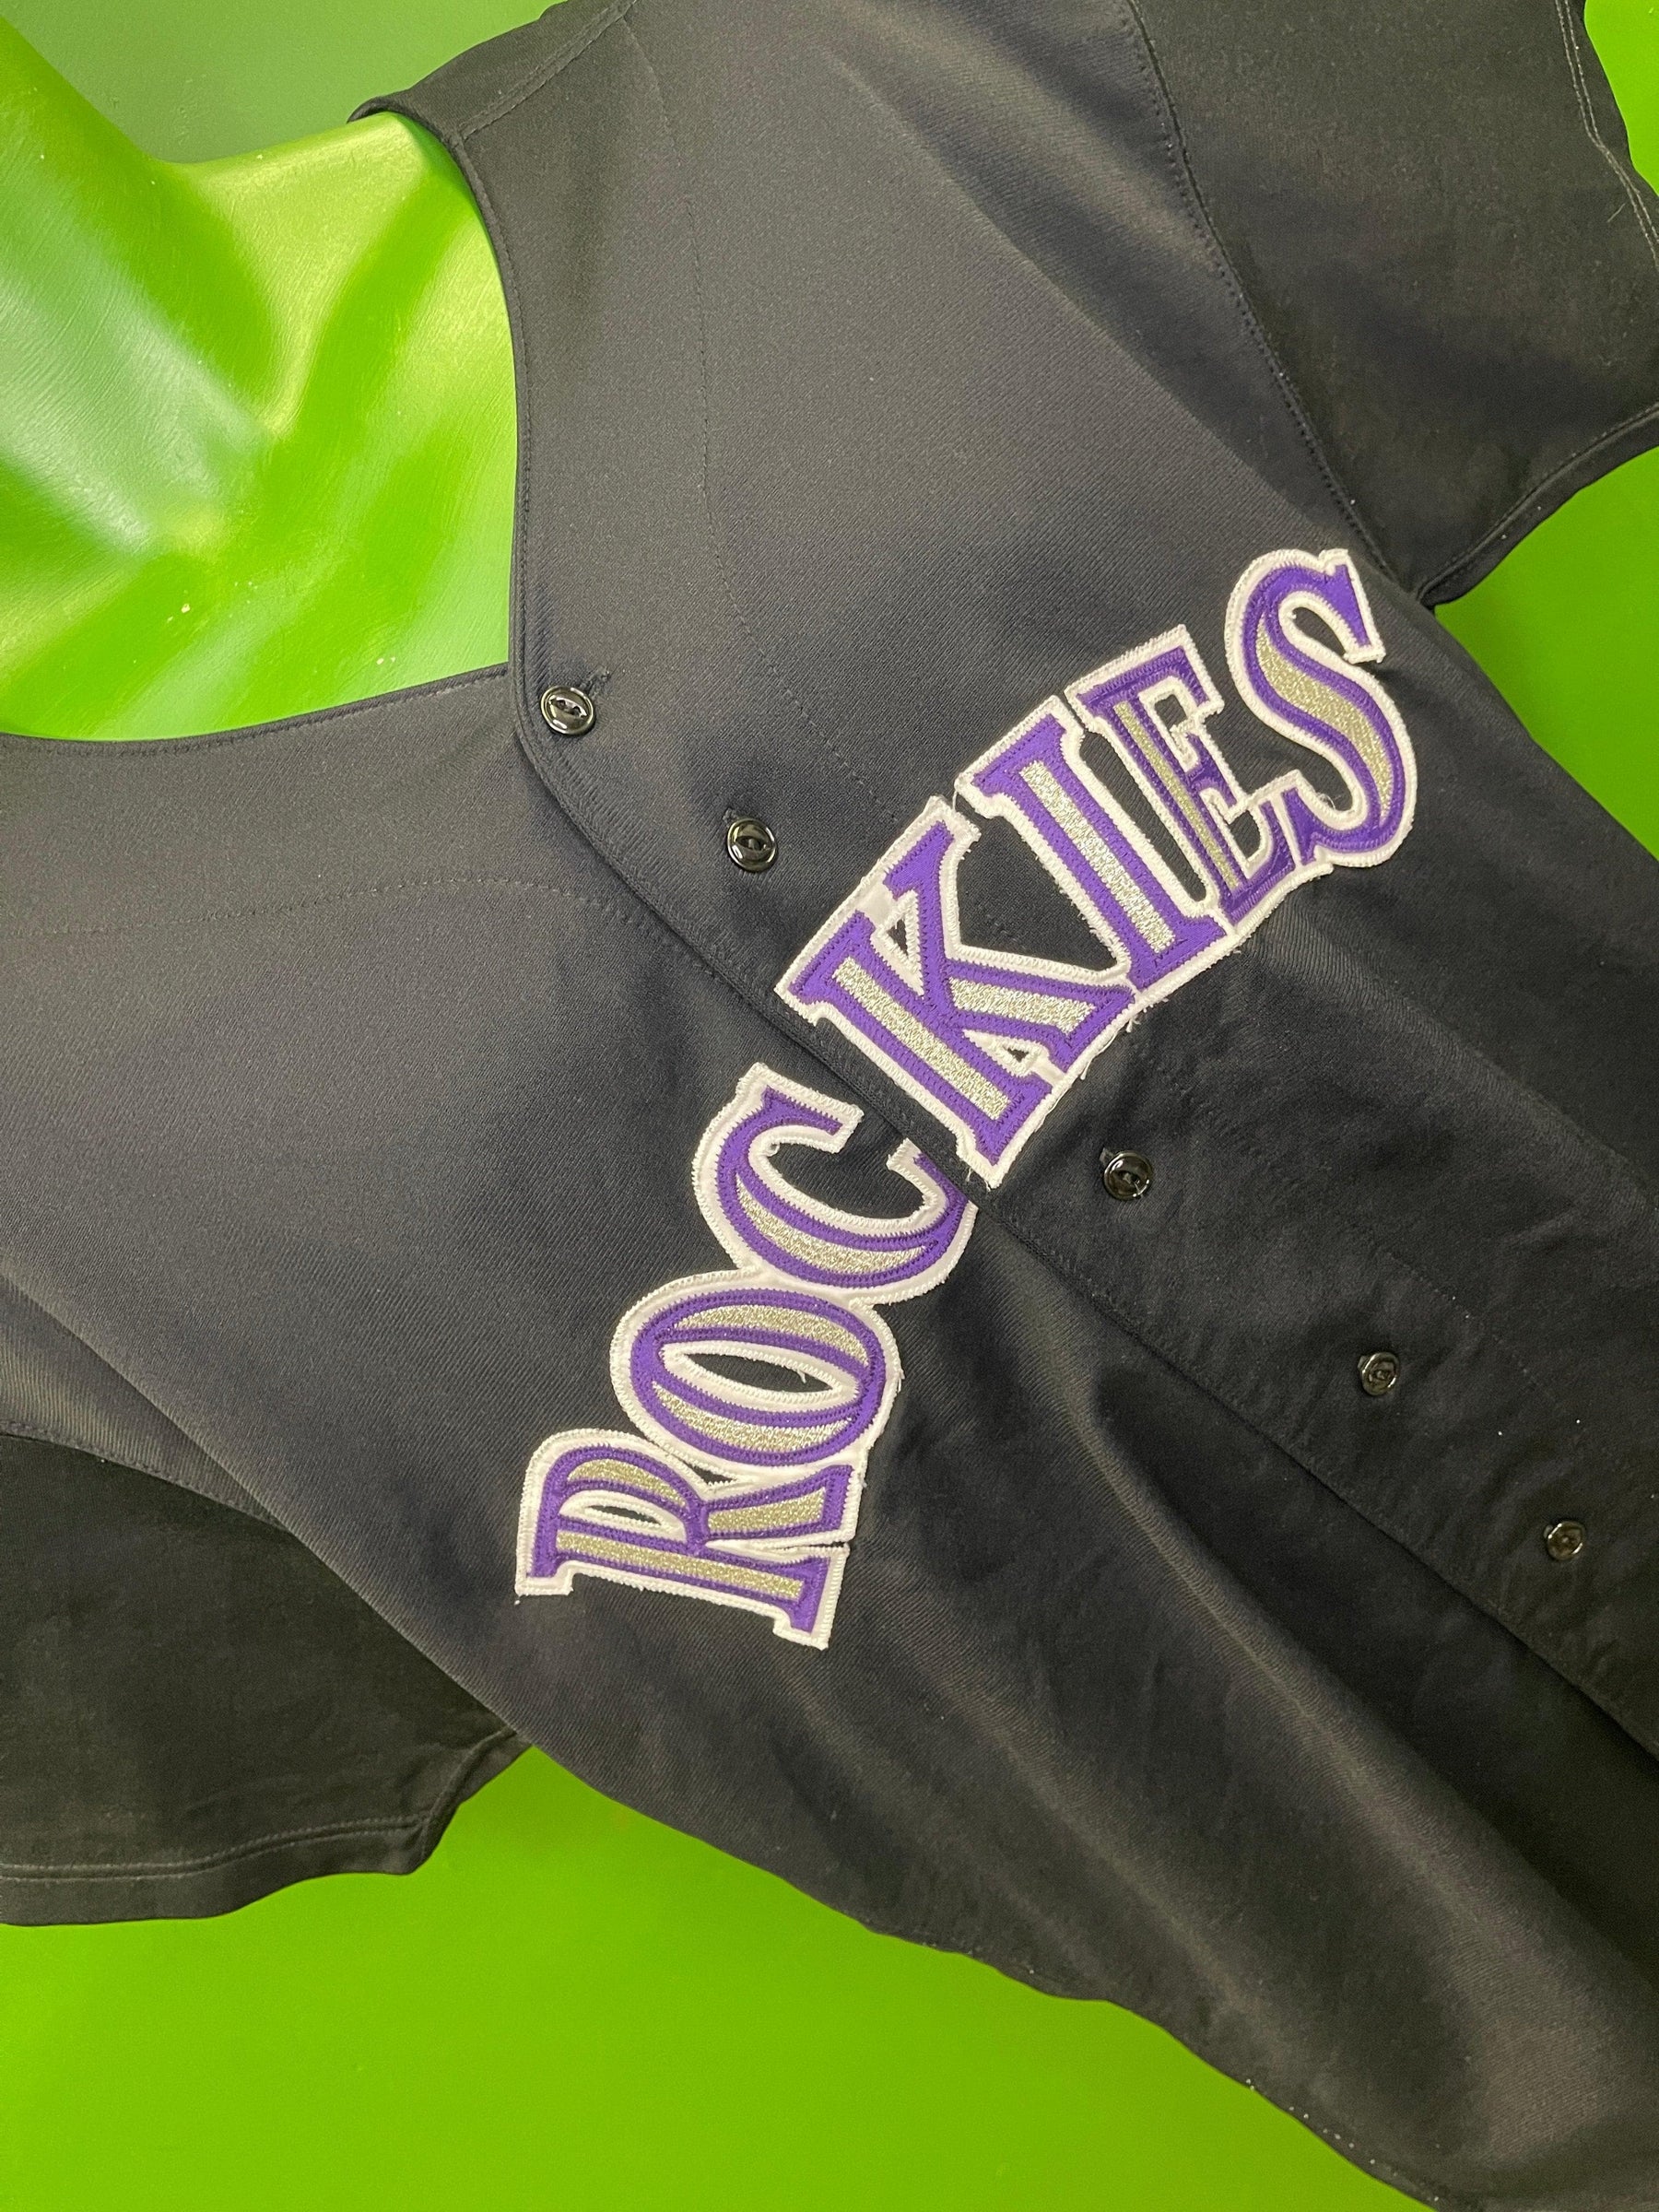 MLB Colorado Rockies Russell Athletic Stitched Baseball Jersey Men's X-Large 48